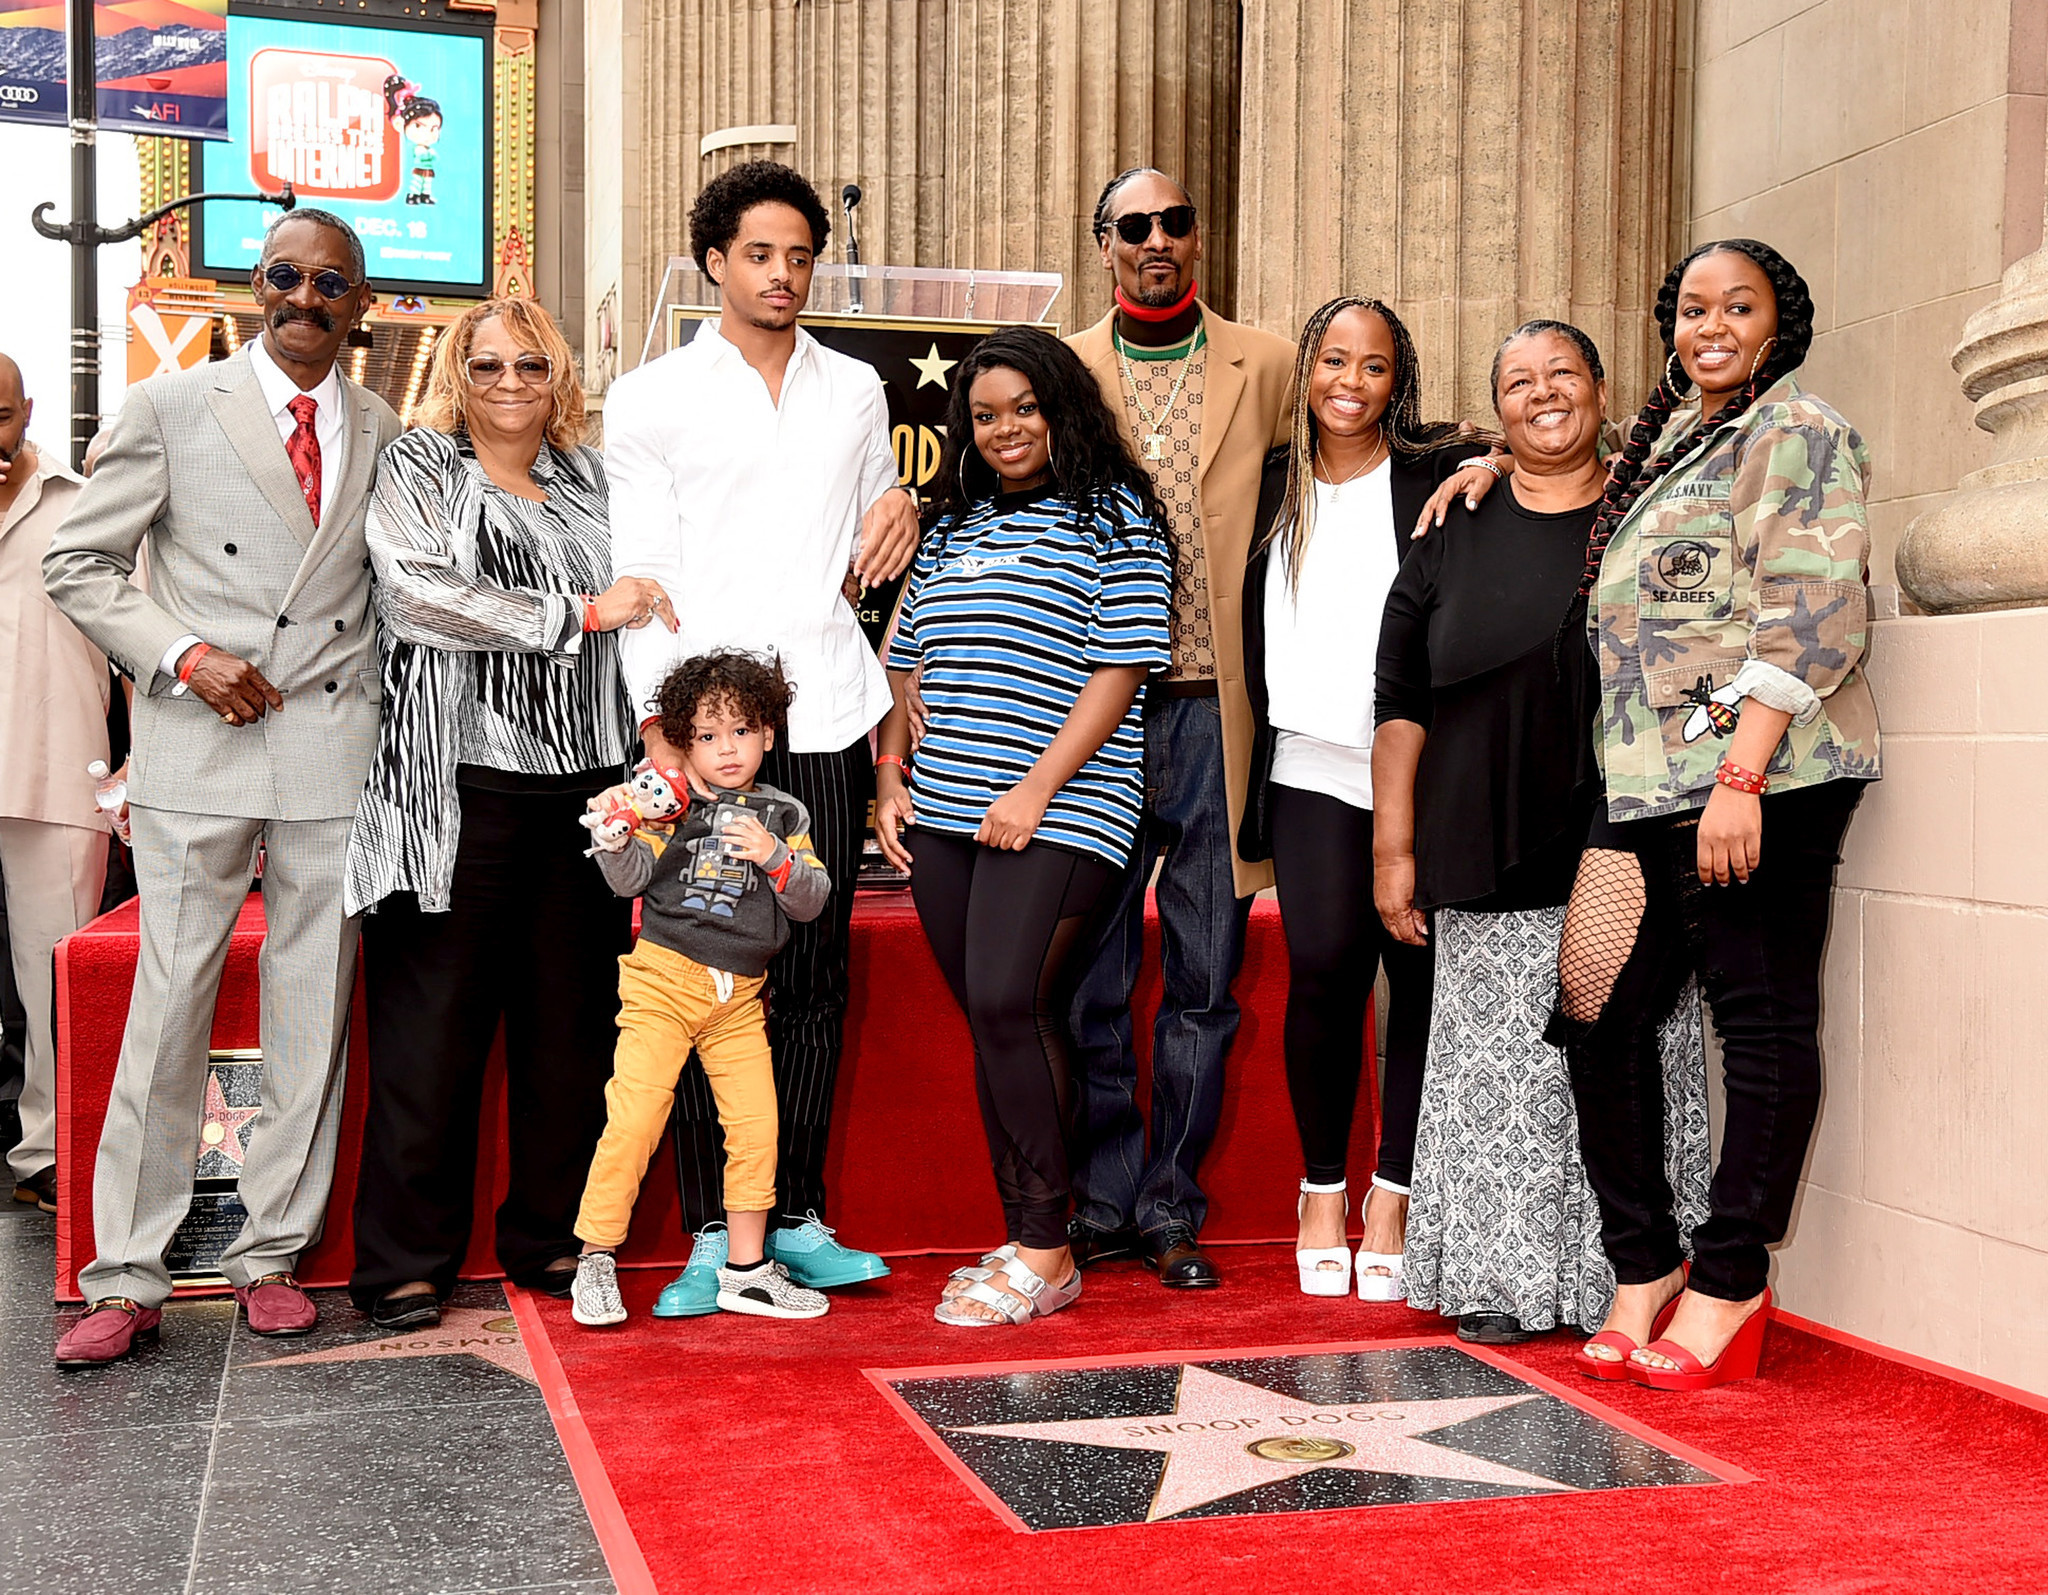 Snoop Dogg, with his family, is honored with a star on The Hollywood Walk Of Fame on Hollywood Boulevard on Nov. 19, 2018 in Los Angeles, Calif.